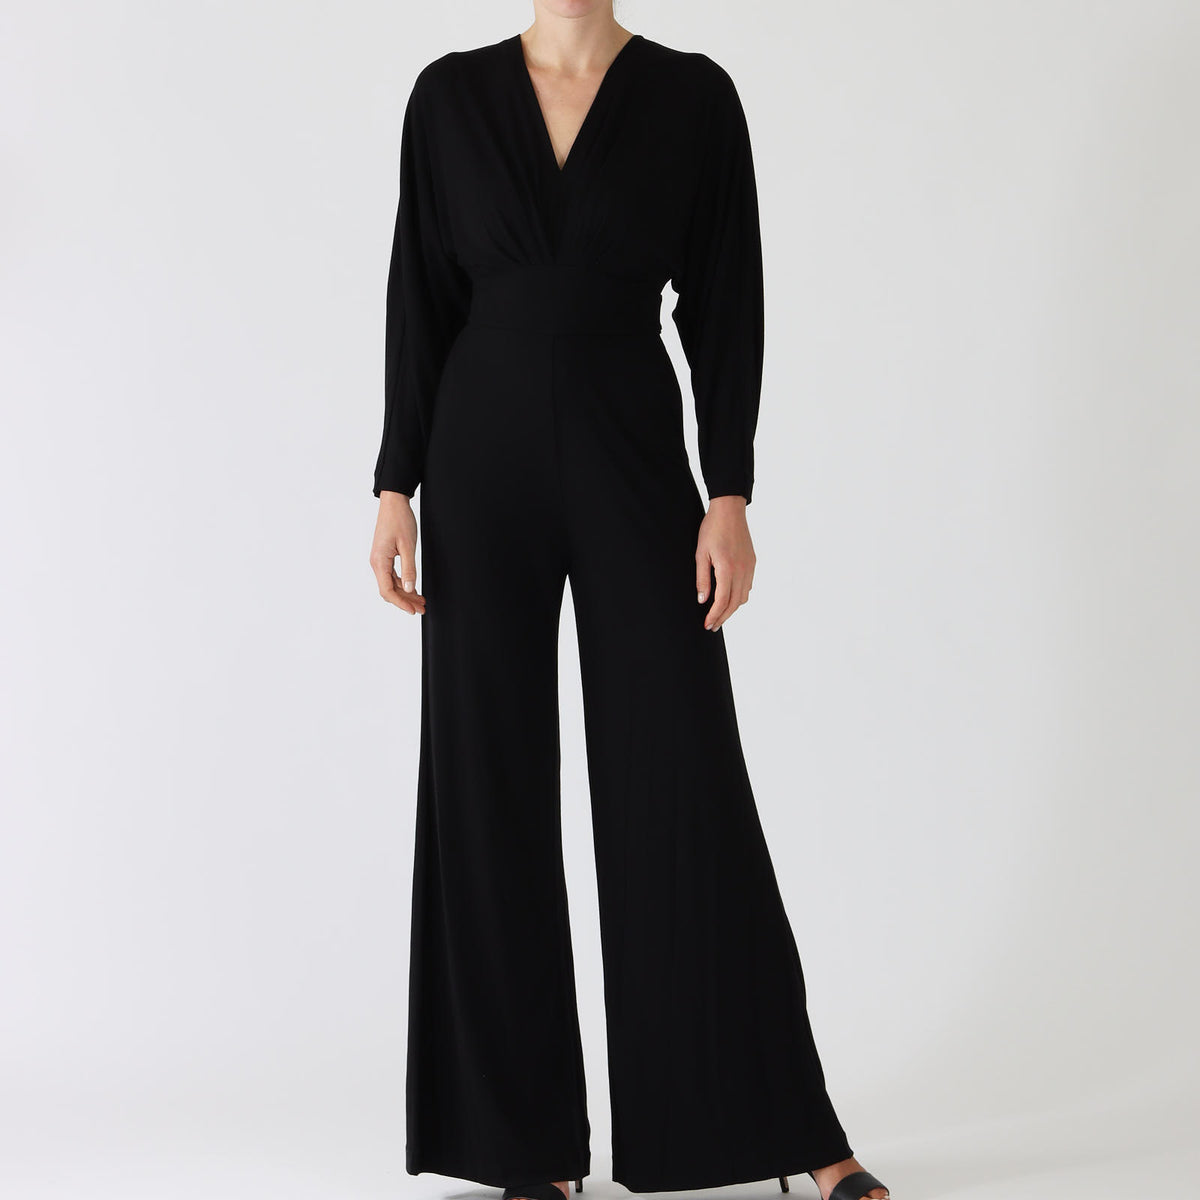 Fanny Black Wide Leg Jumpsuit Angela Beer The Ultimate Ladies Shopping Experience Since 1979